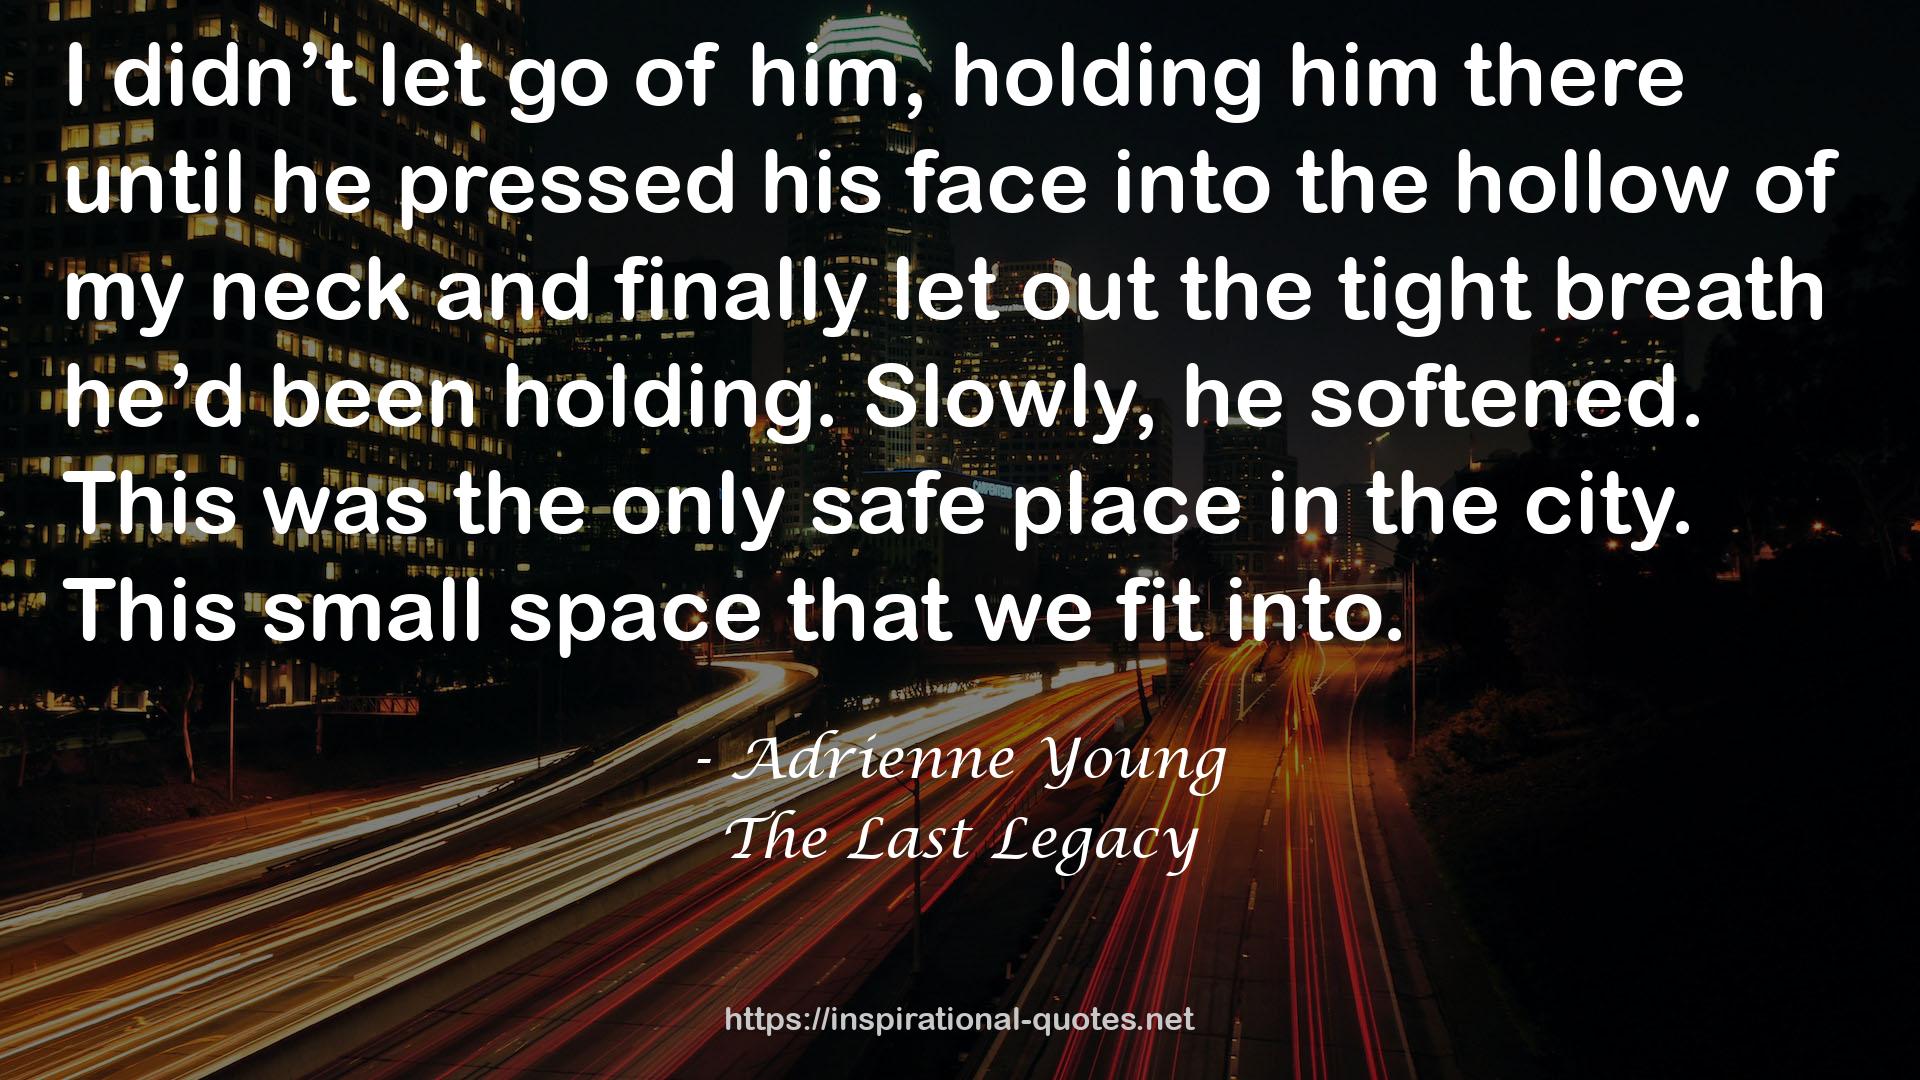 The Last Legacy QUOTES